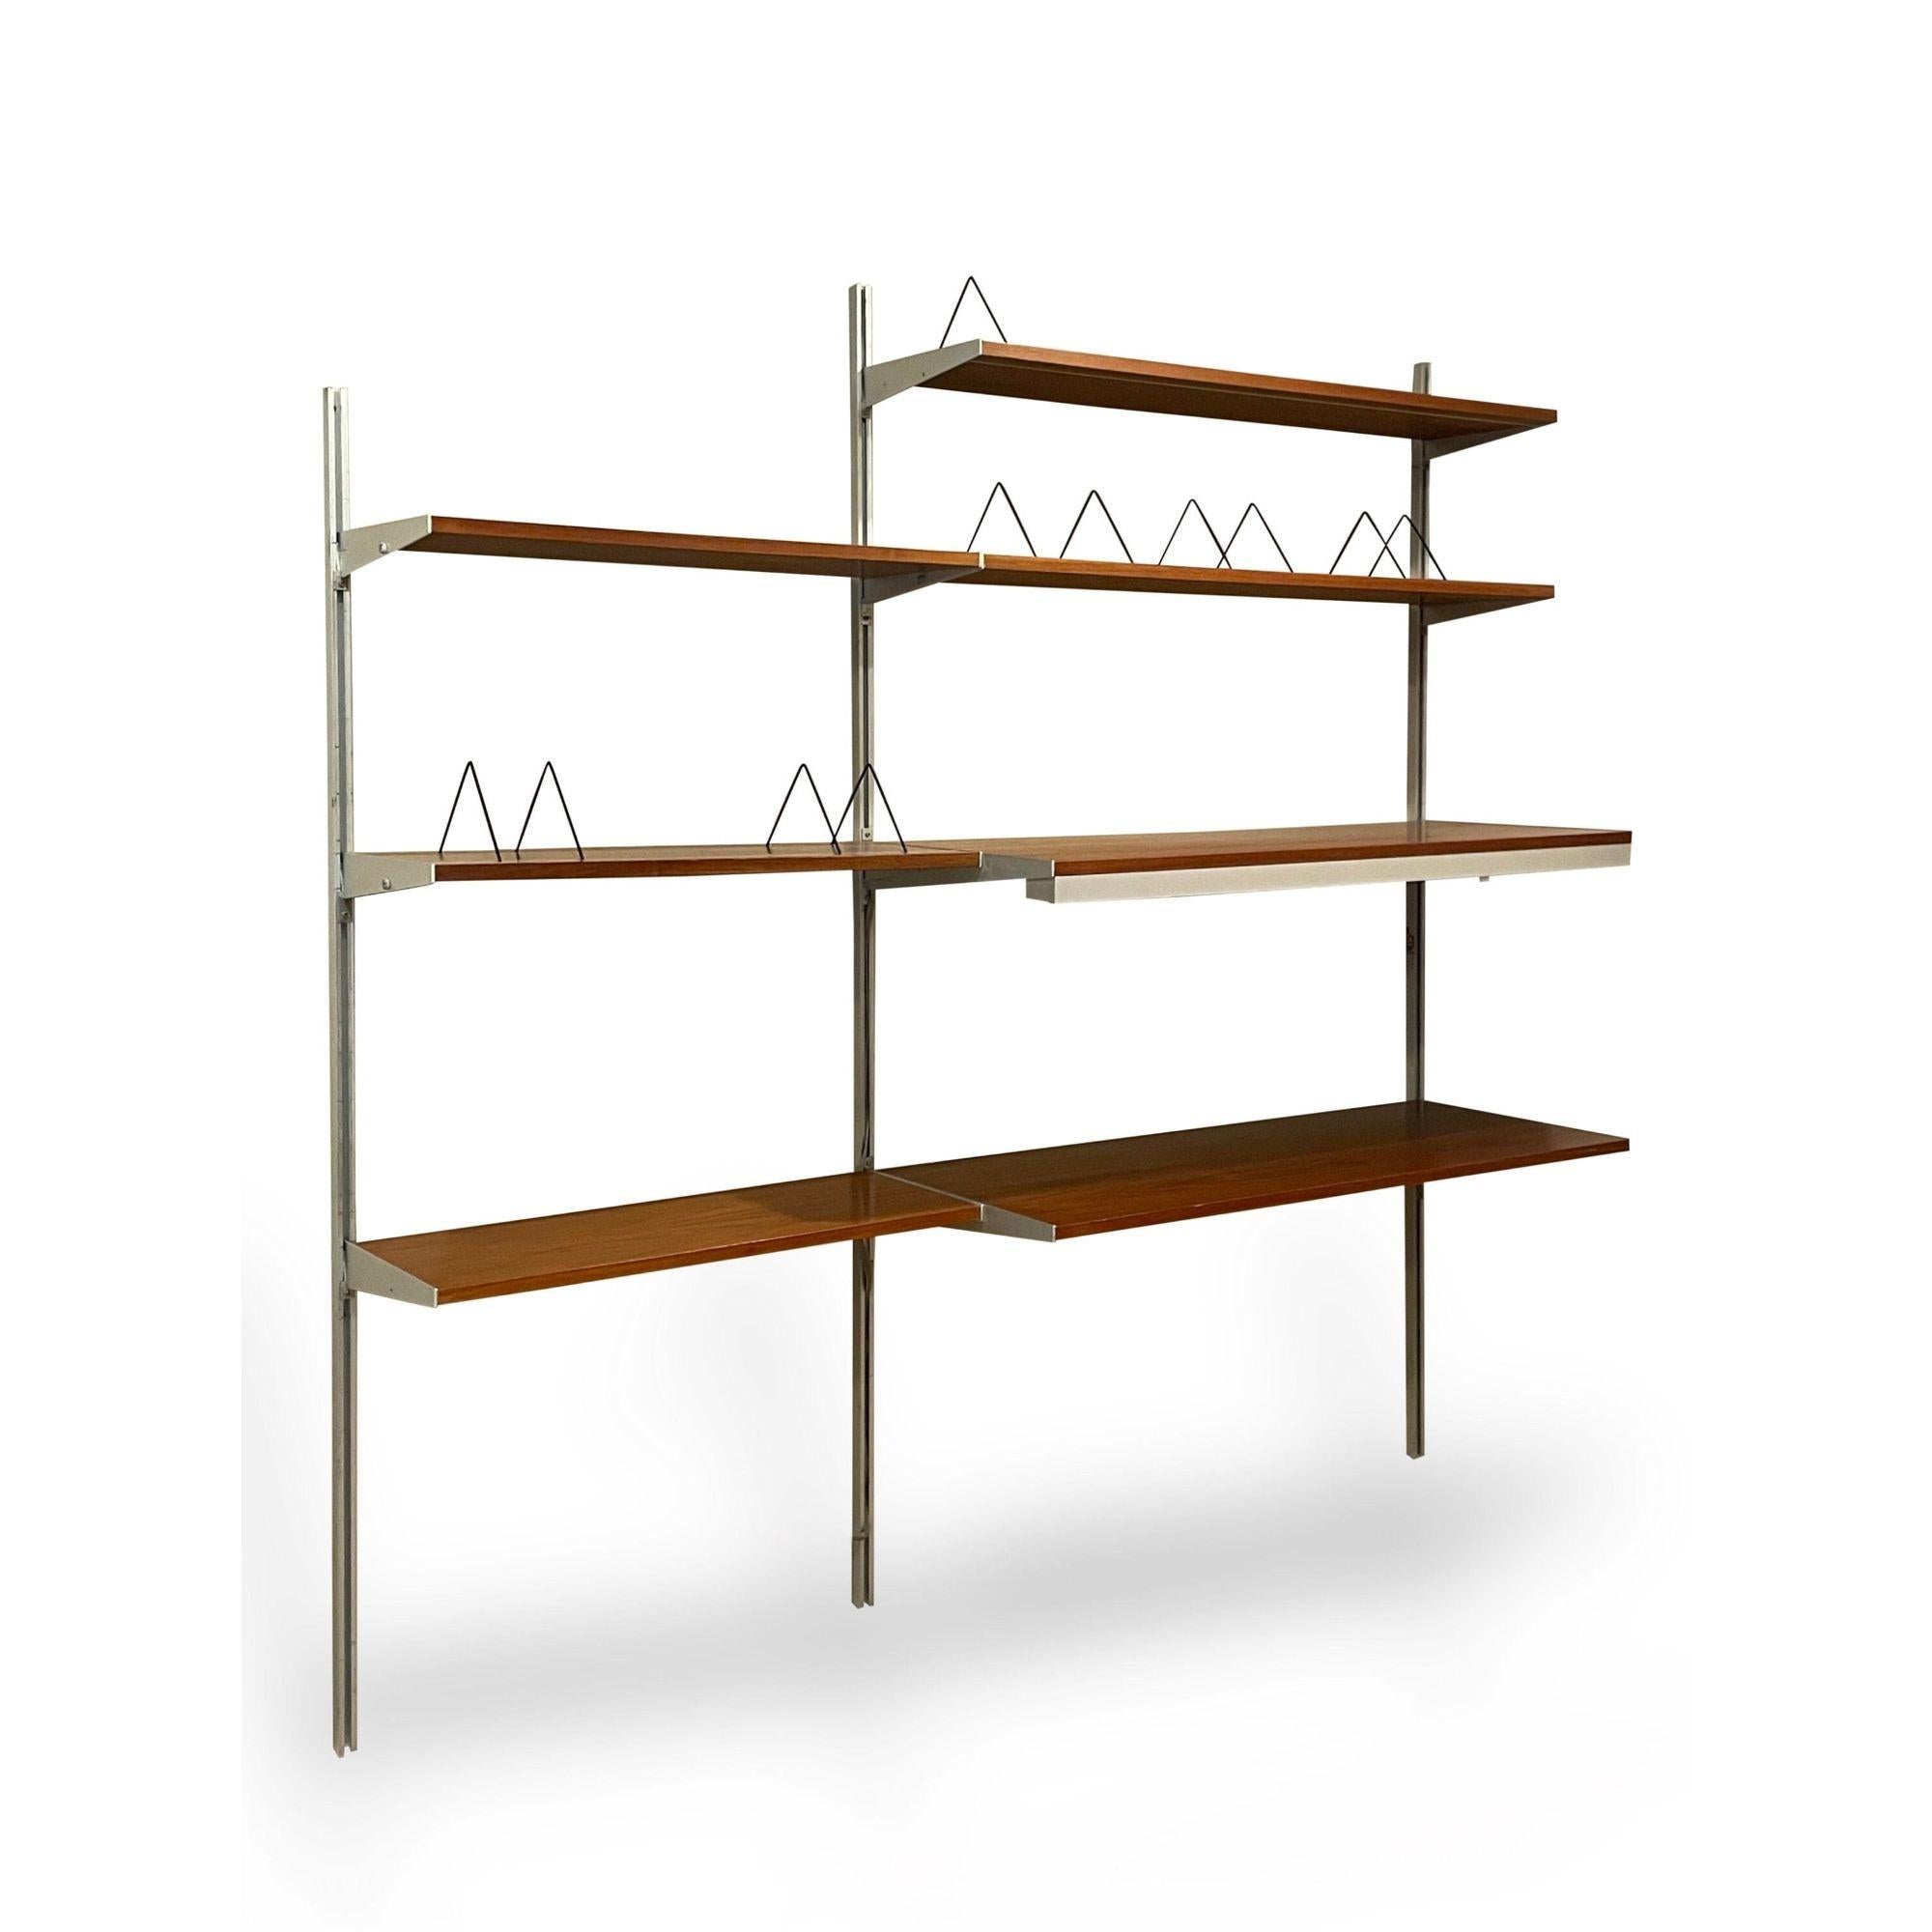 Vintage George Nelson CSS Wall Mounted Shelving Unit 1960s

CSS wall unit designed by George Nelson for Herman Miller
1960's example with two bays of shelving
Three shelves with adjustable bookends and an under mount lamp
Includes:
2 - 79.5 inch